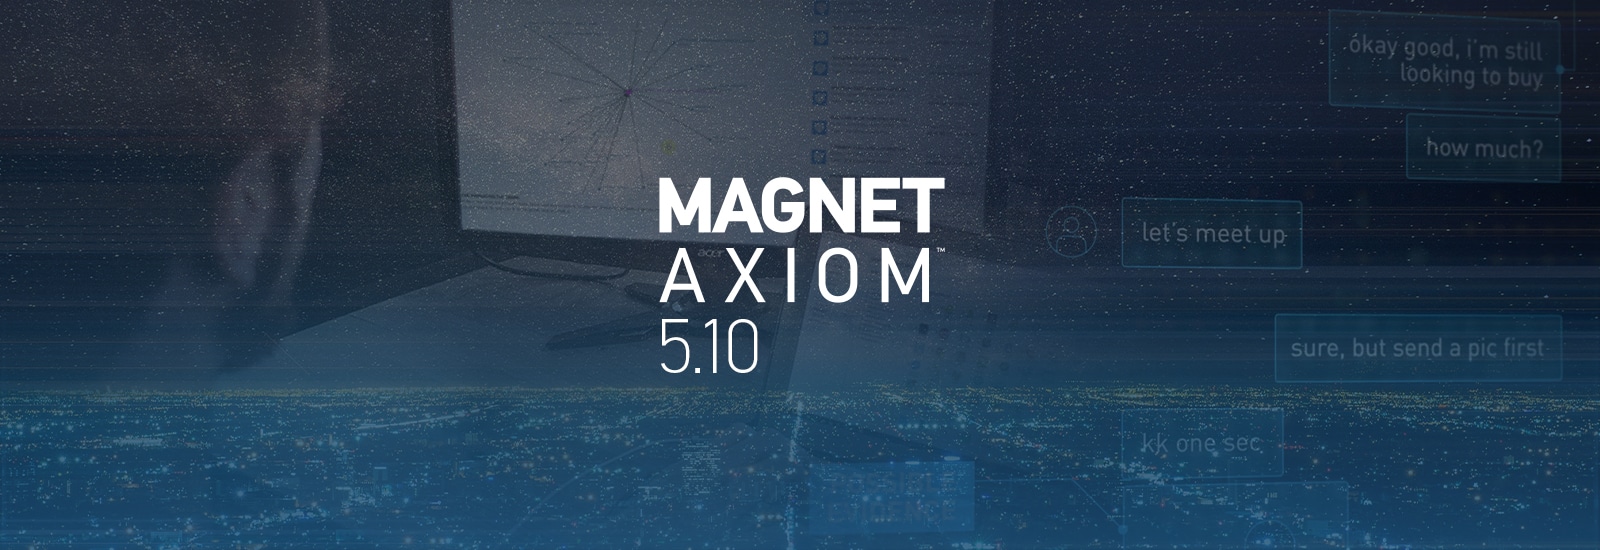 A decorative header for the Magnet AXIOM 5.10 release